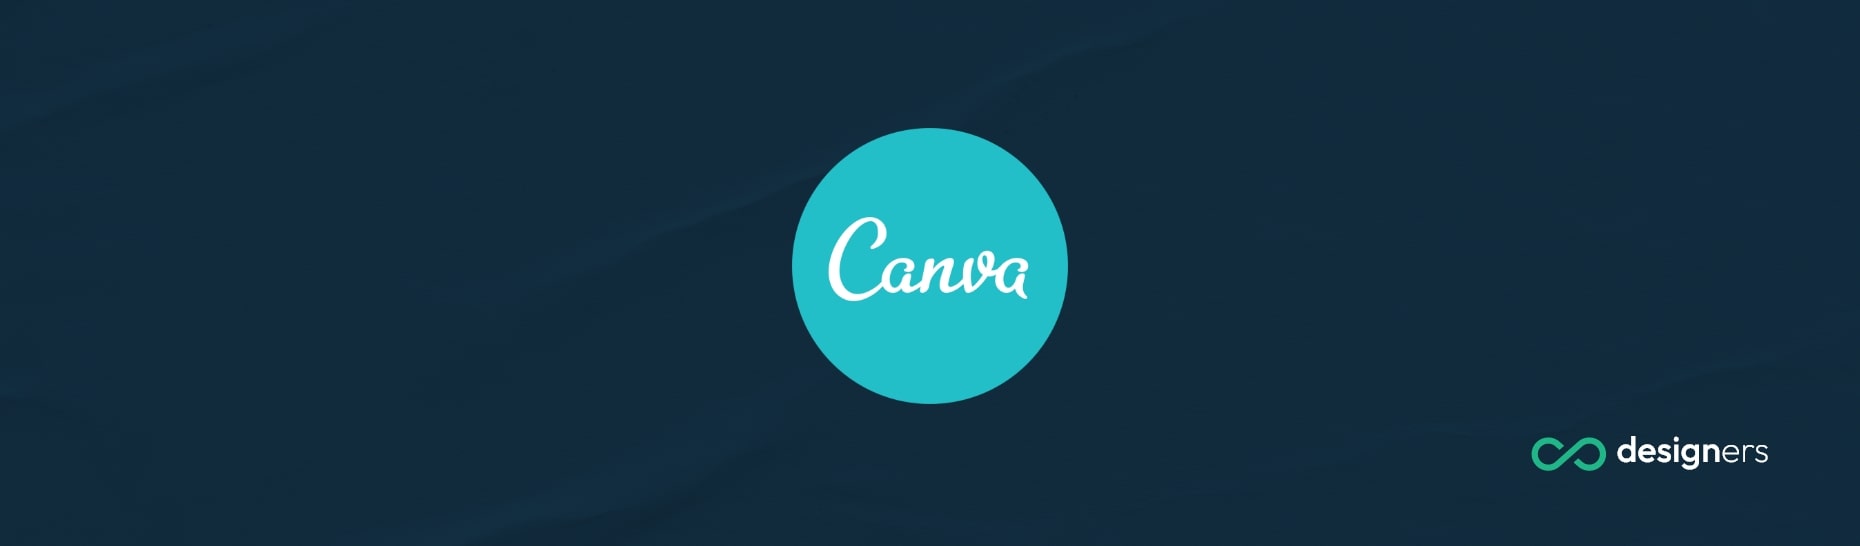 Does Canva offer printing services?